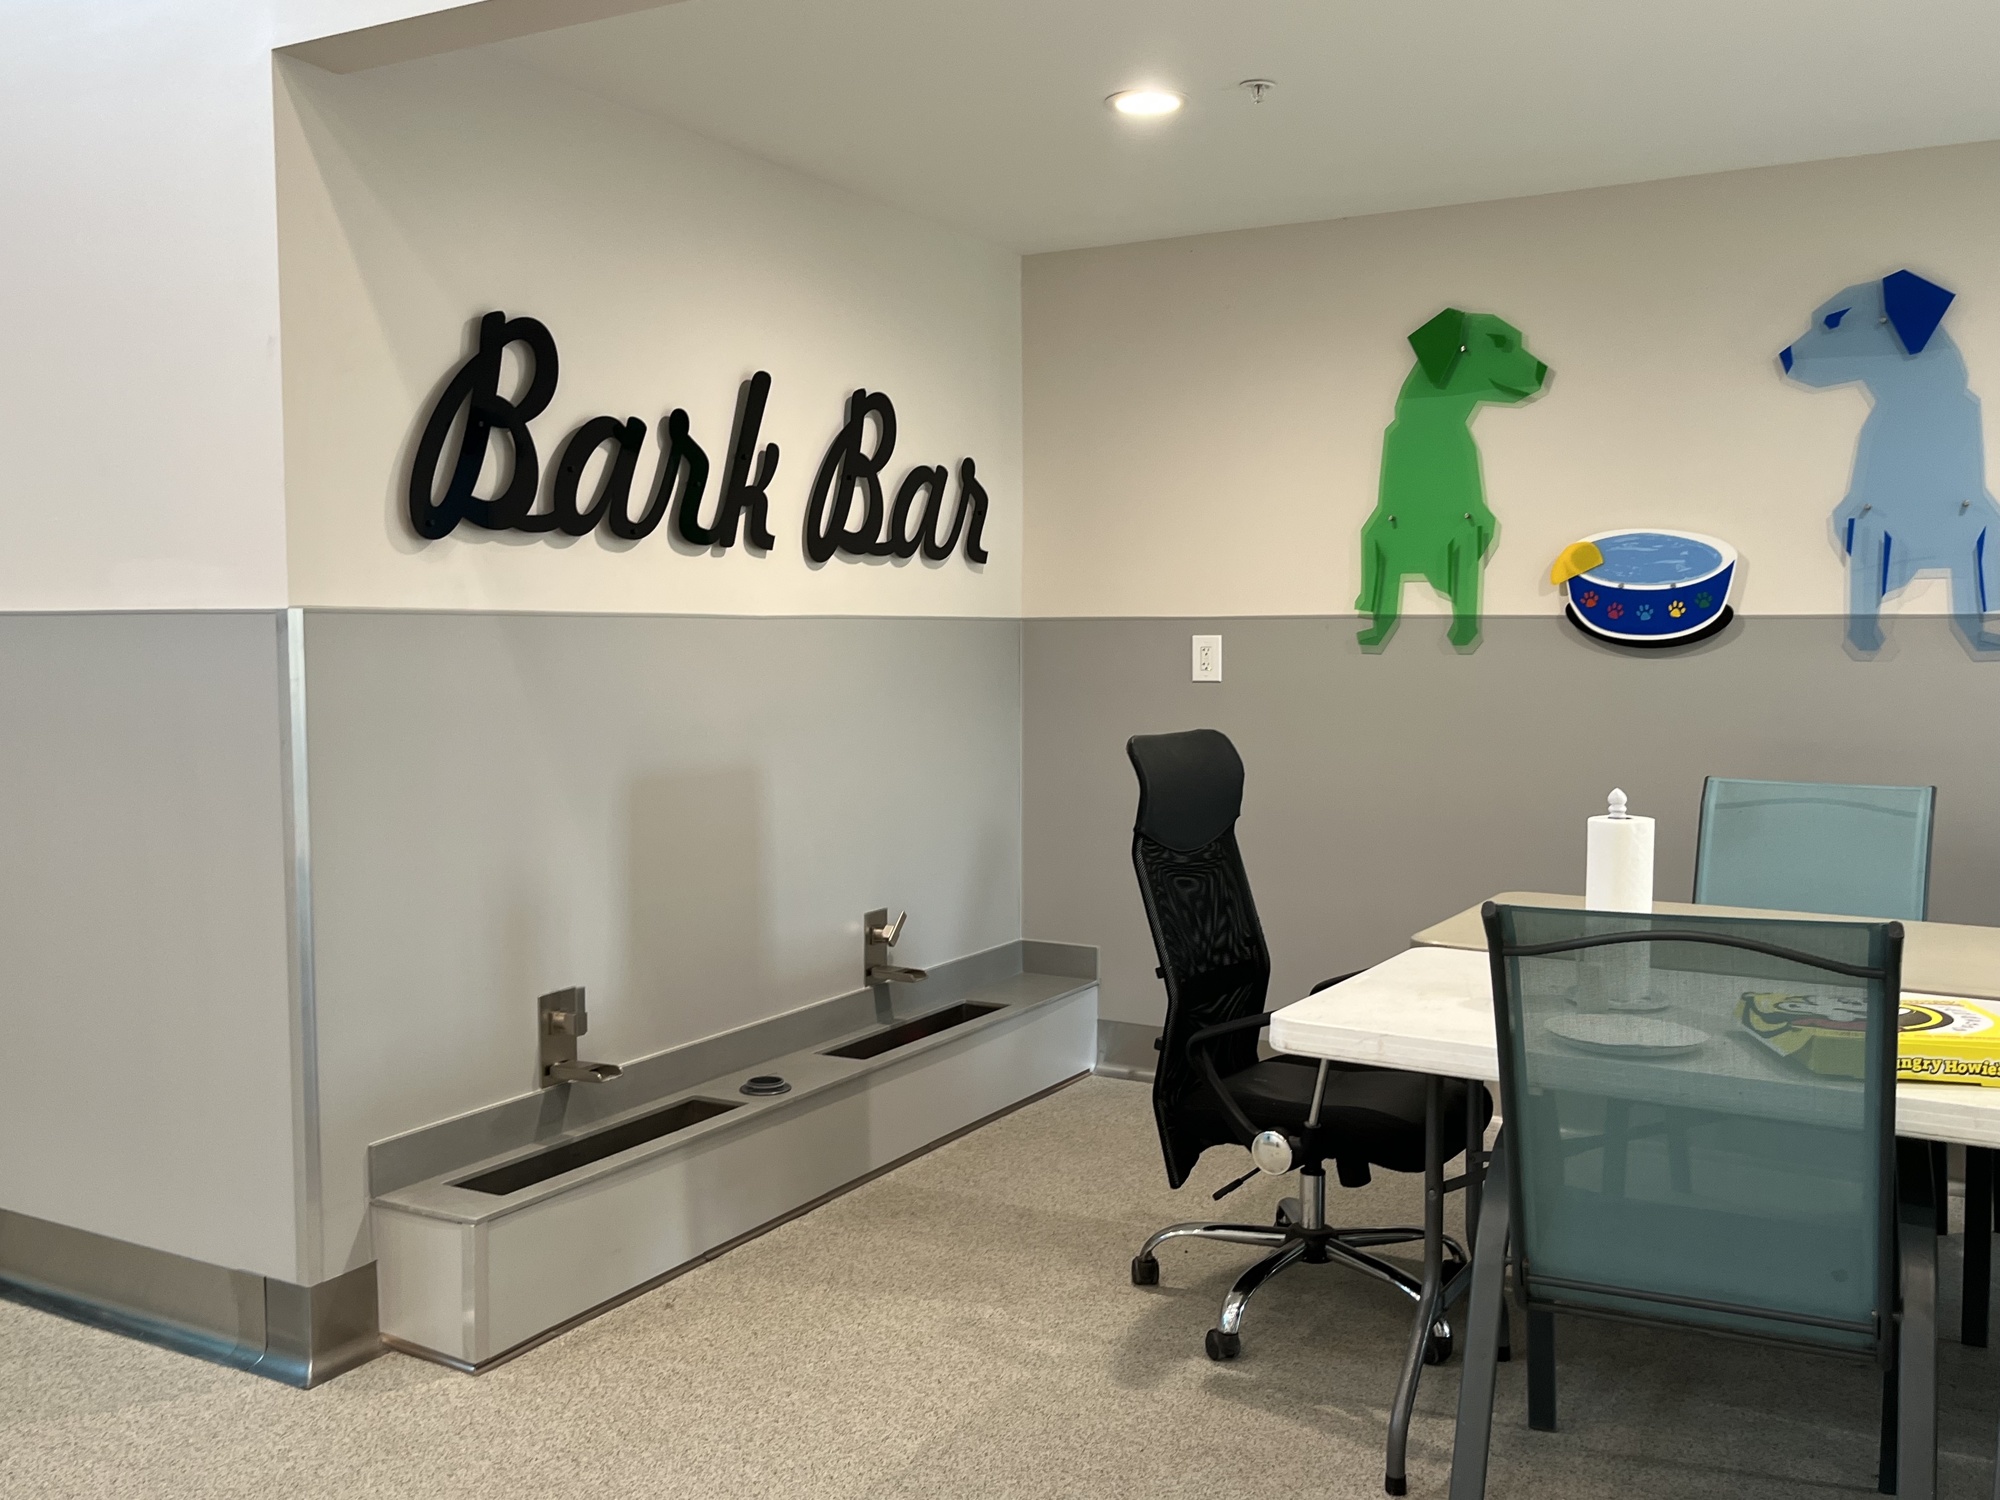 The Bark Bar is a part of the training room where dogs can easily get a drink during training.